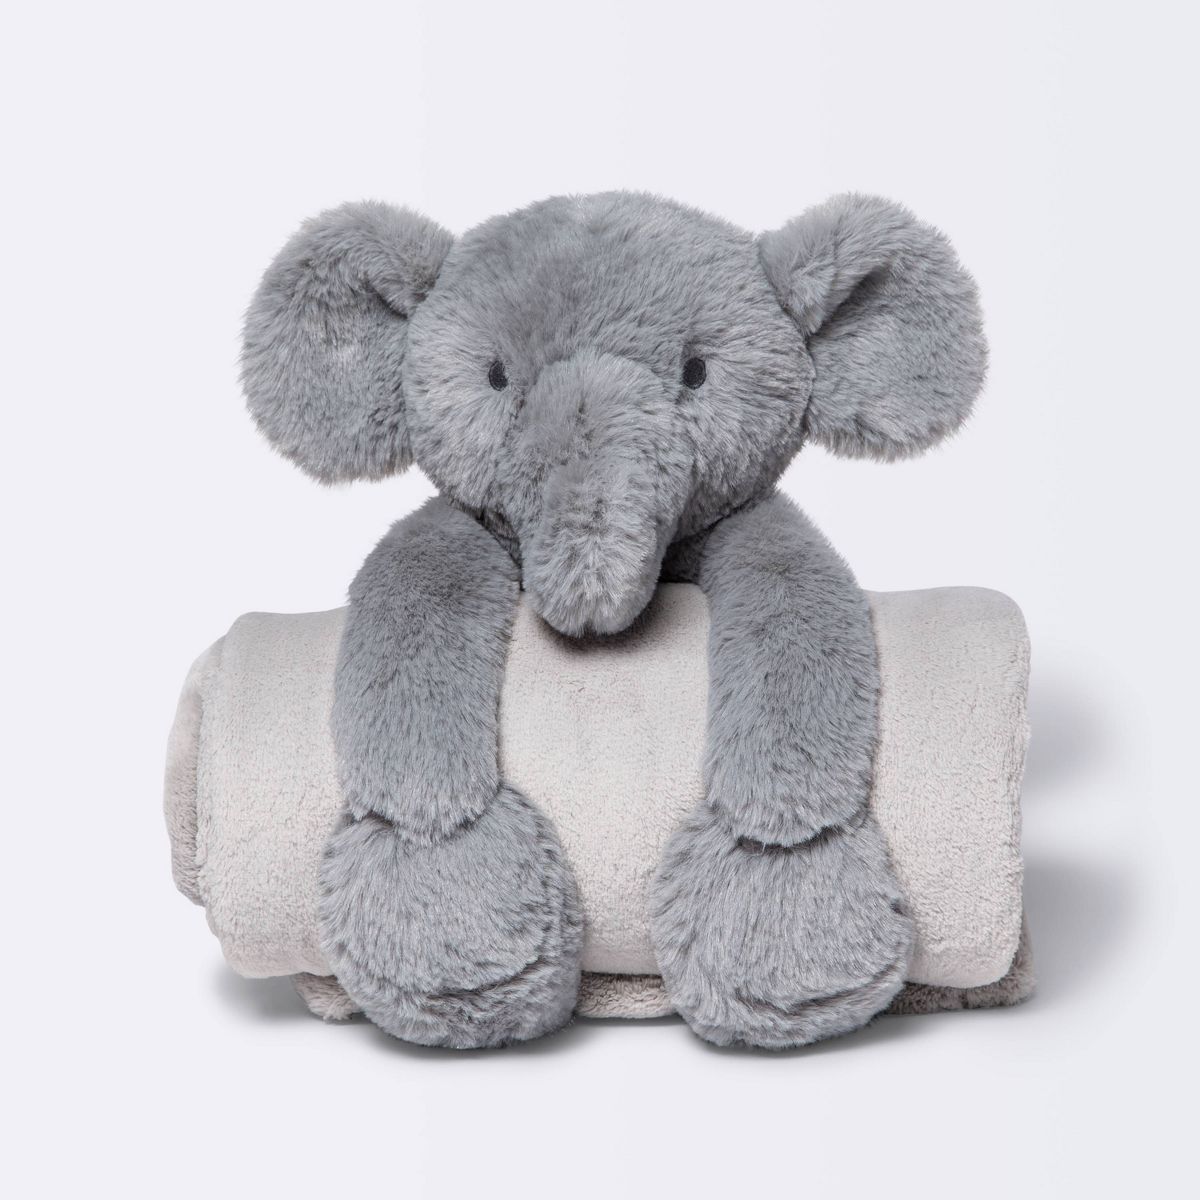 Plush Blanket with Soft Toy - Cloud Island™ Gray Elephant | Target